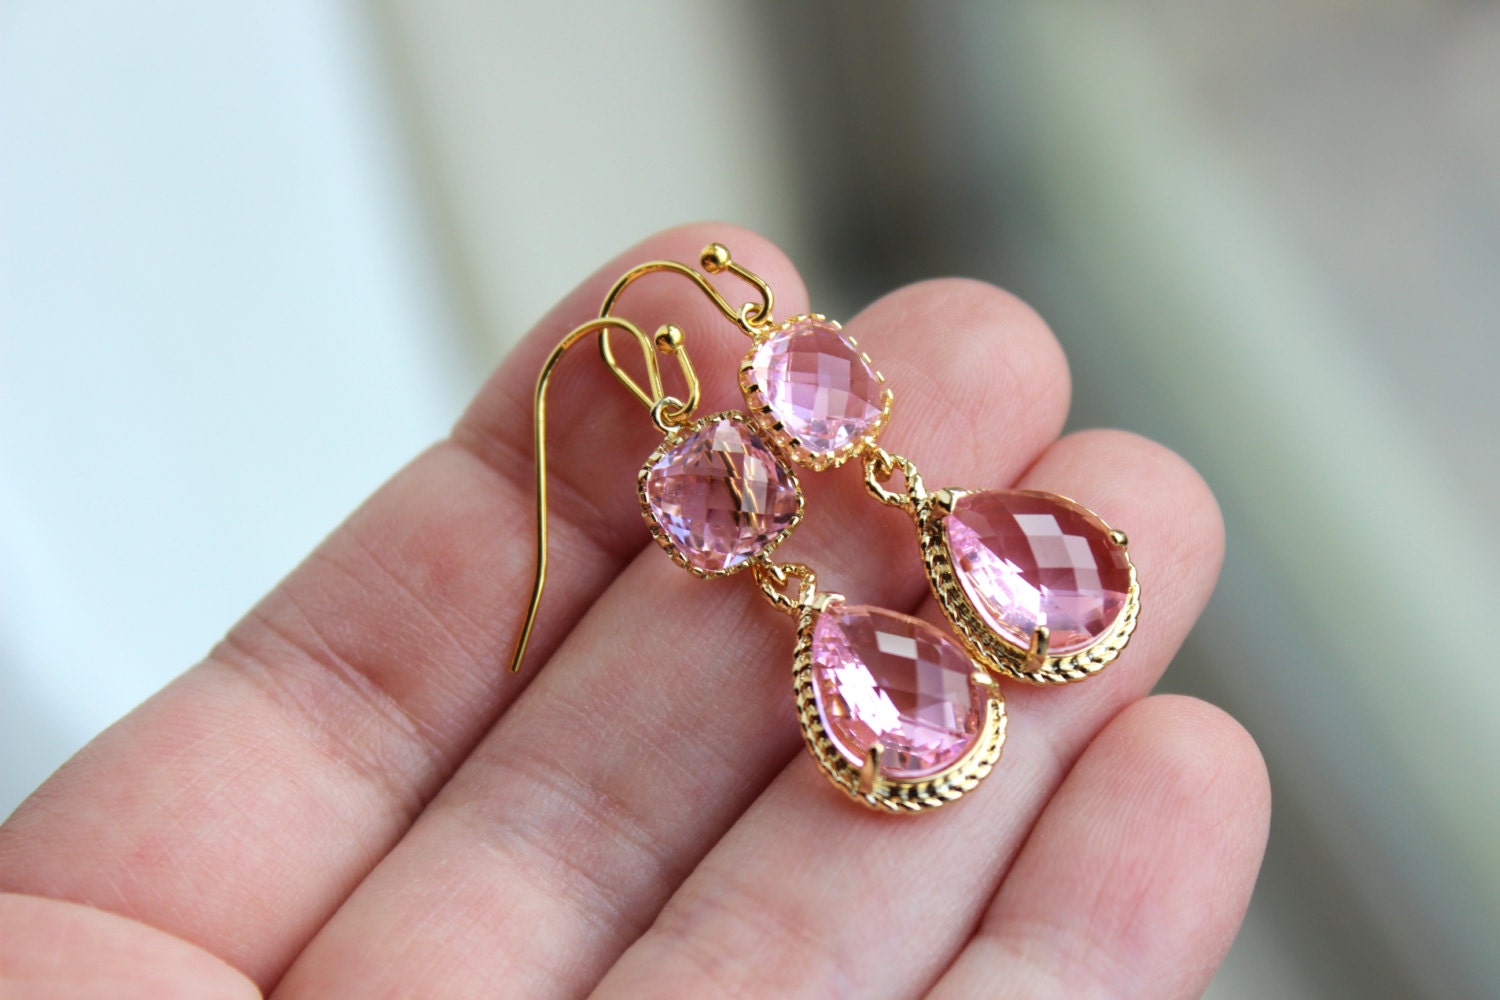 Beatrice Statement Earrings in Blush Pink Dahlia and Swarovski Crystals